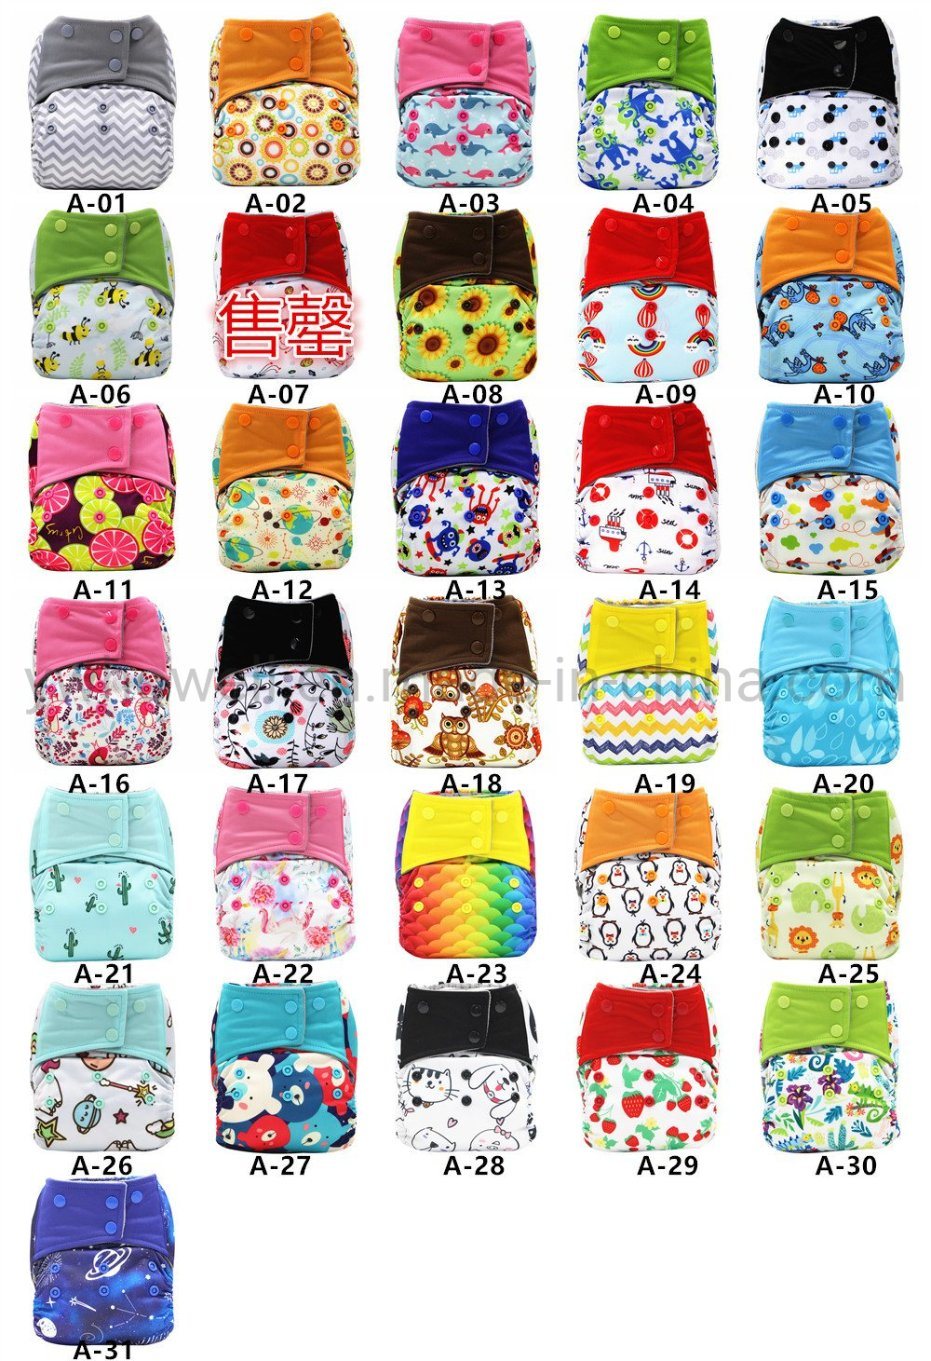 Baby Cloth Diapers One Size Adjustable Washable